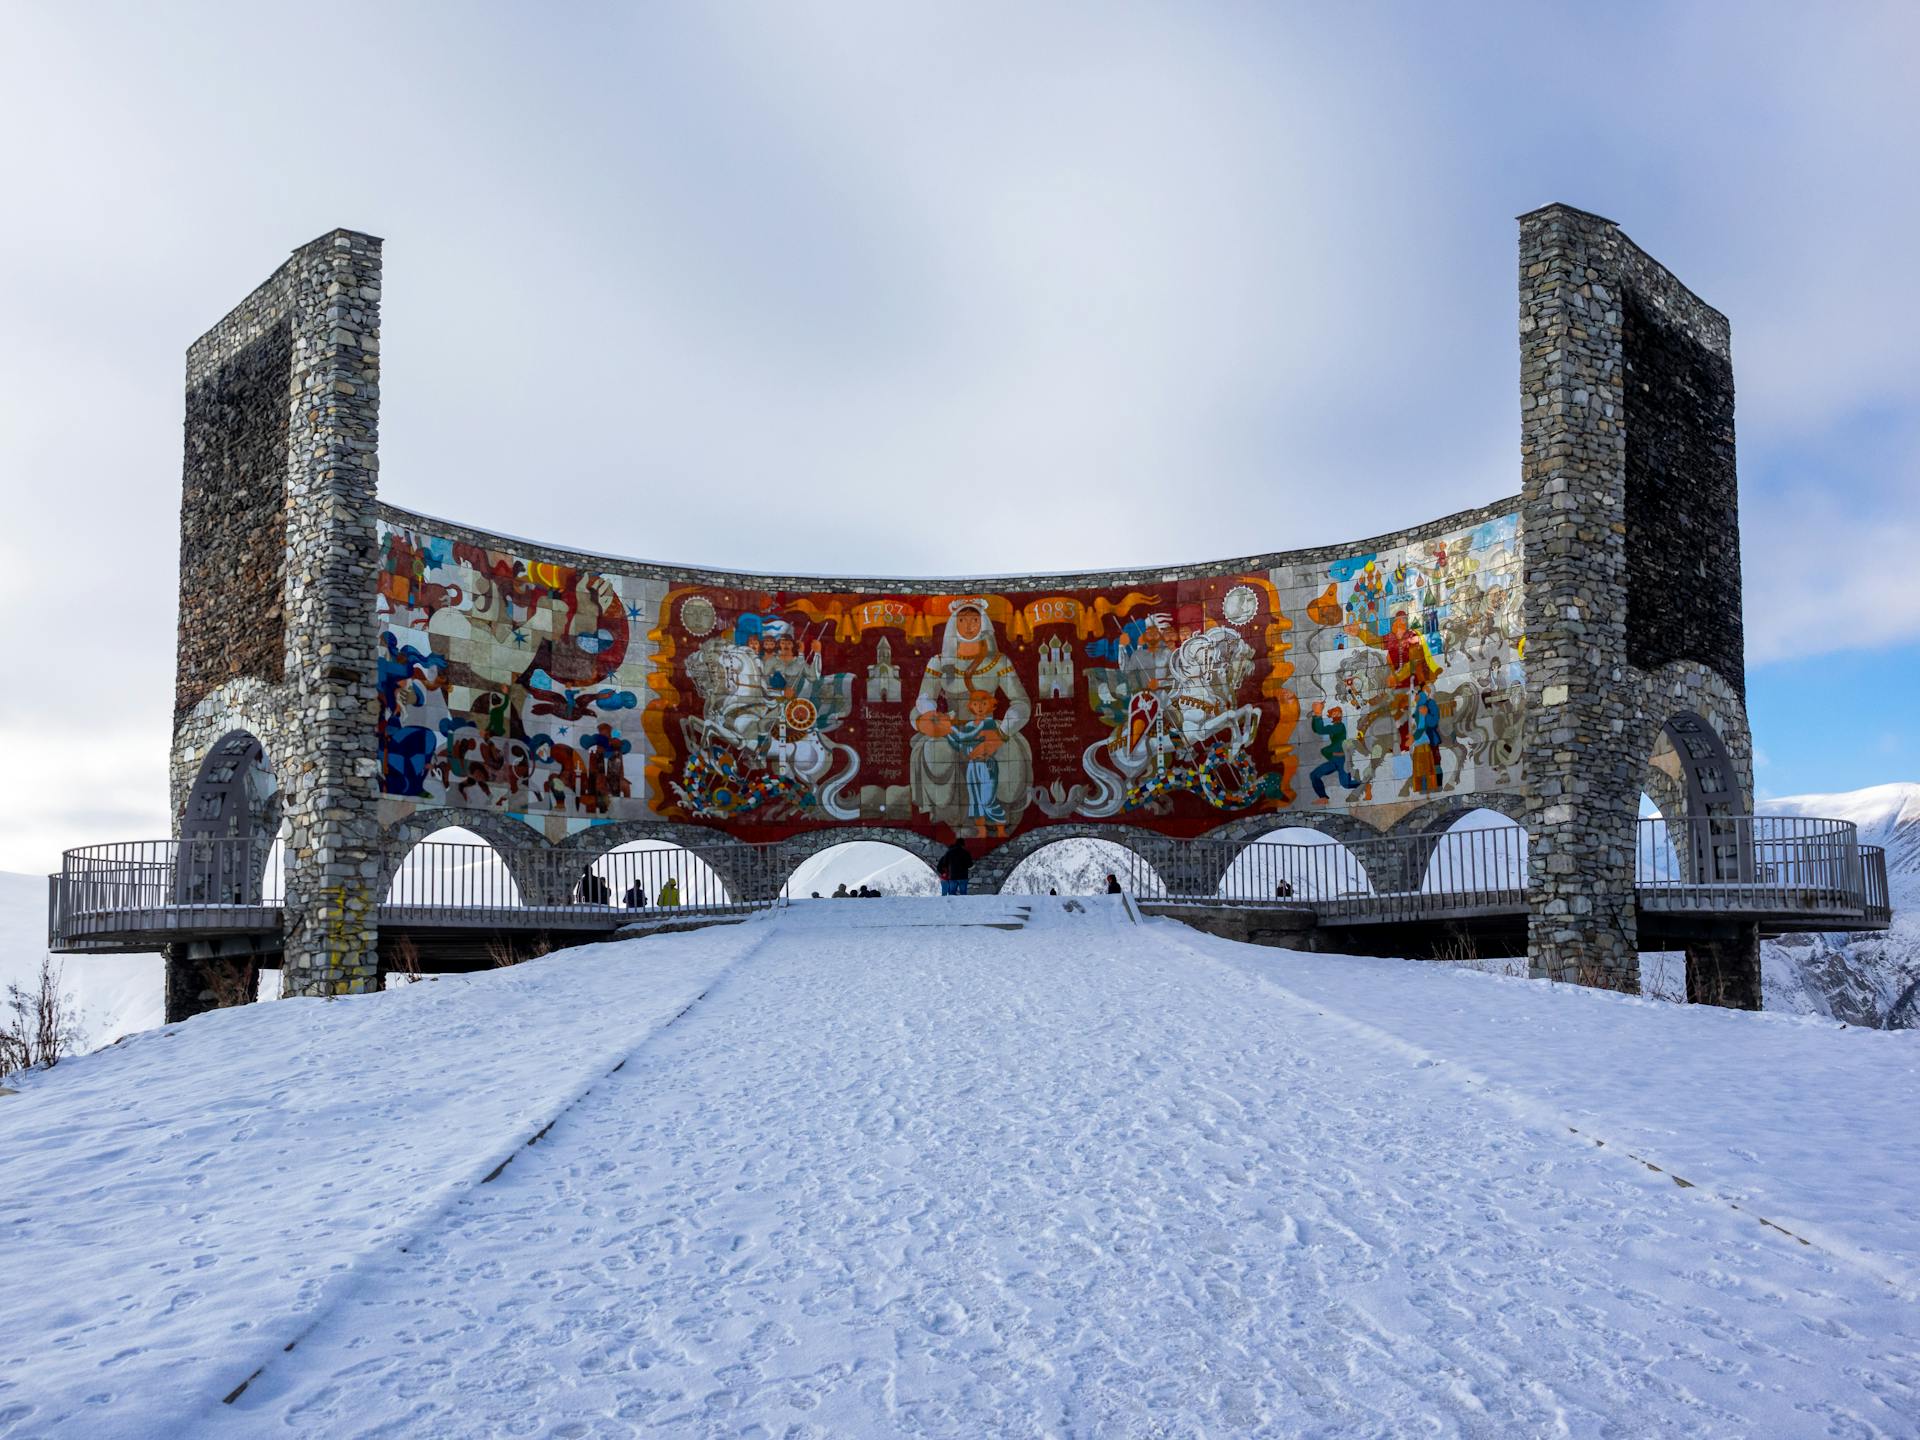 Low angle of old stone arched Russia Georgia Friendship Monument with tile mural inside located on snowy hill in Gudauri